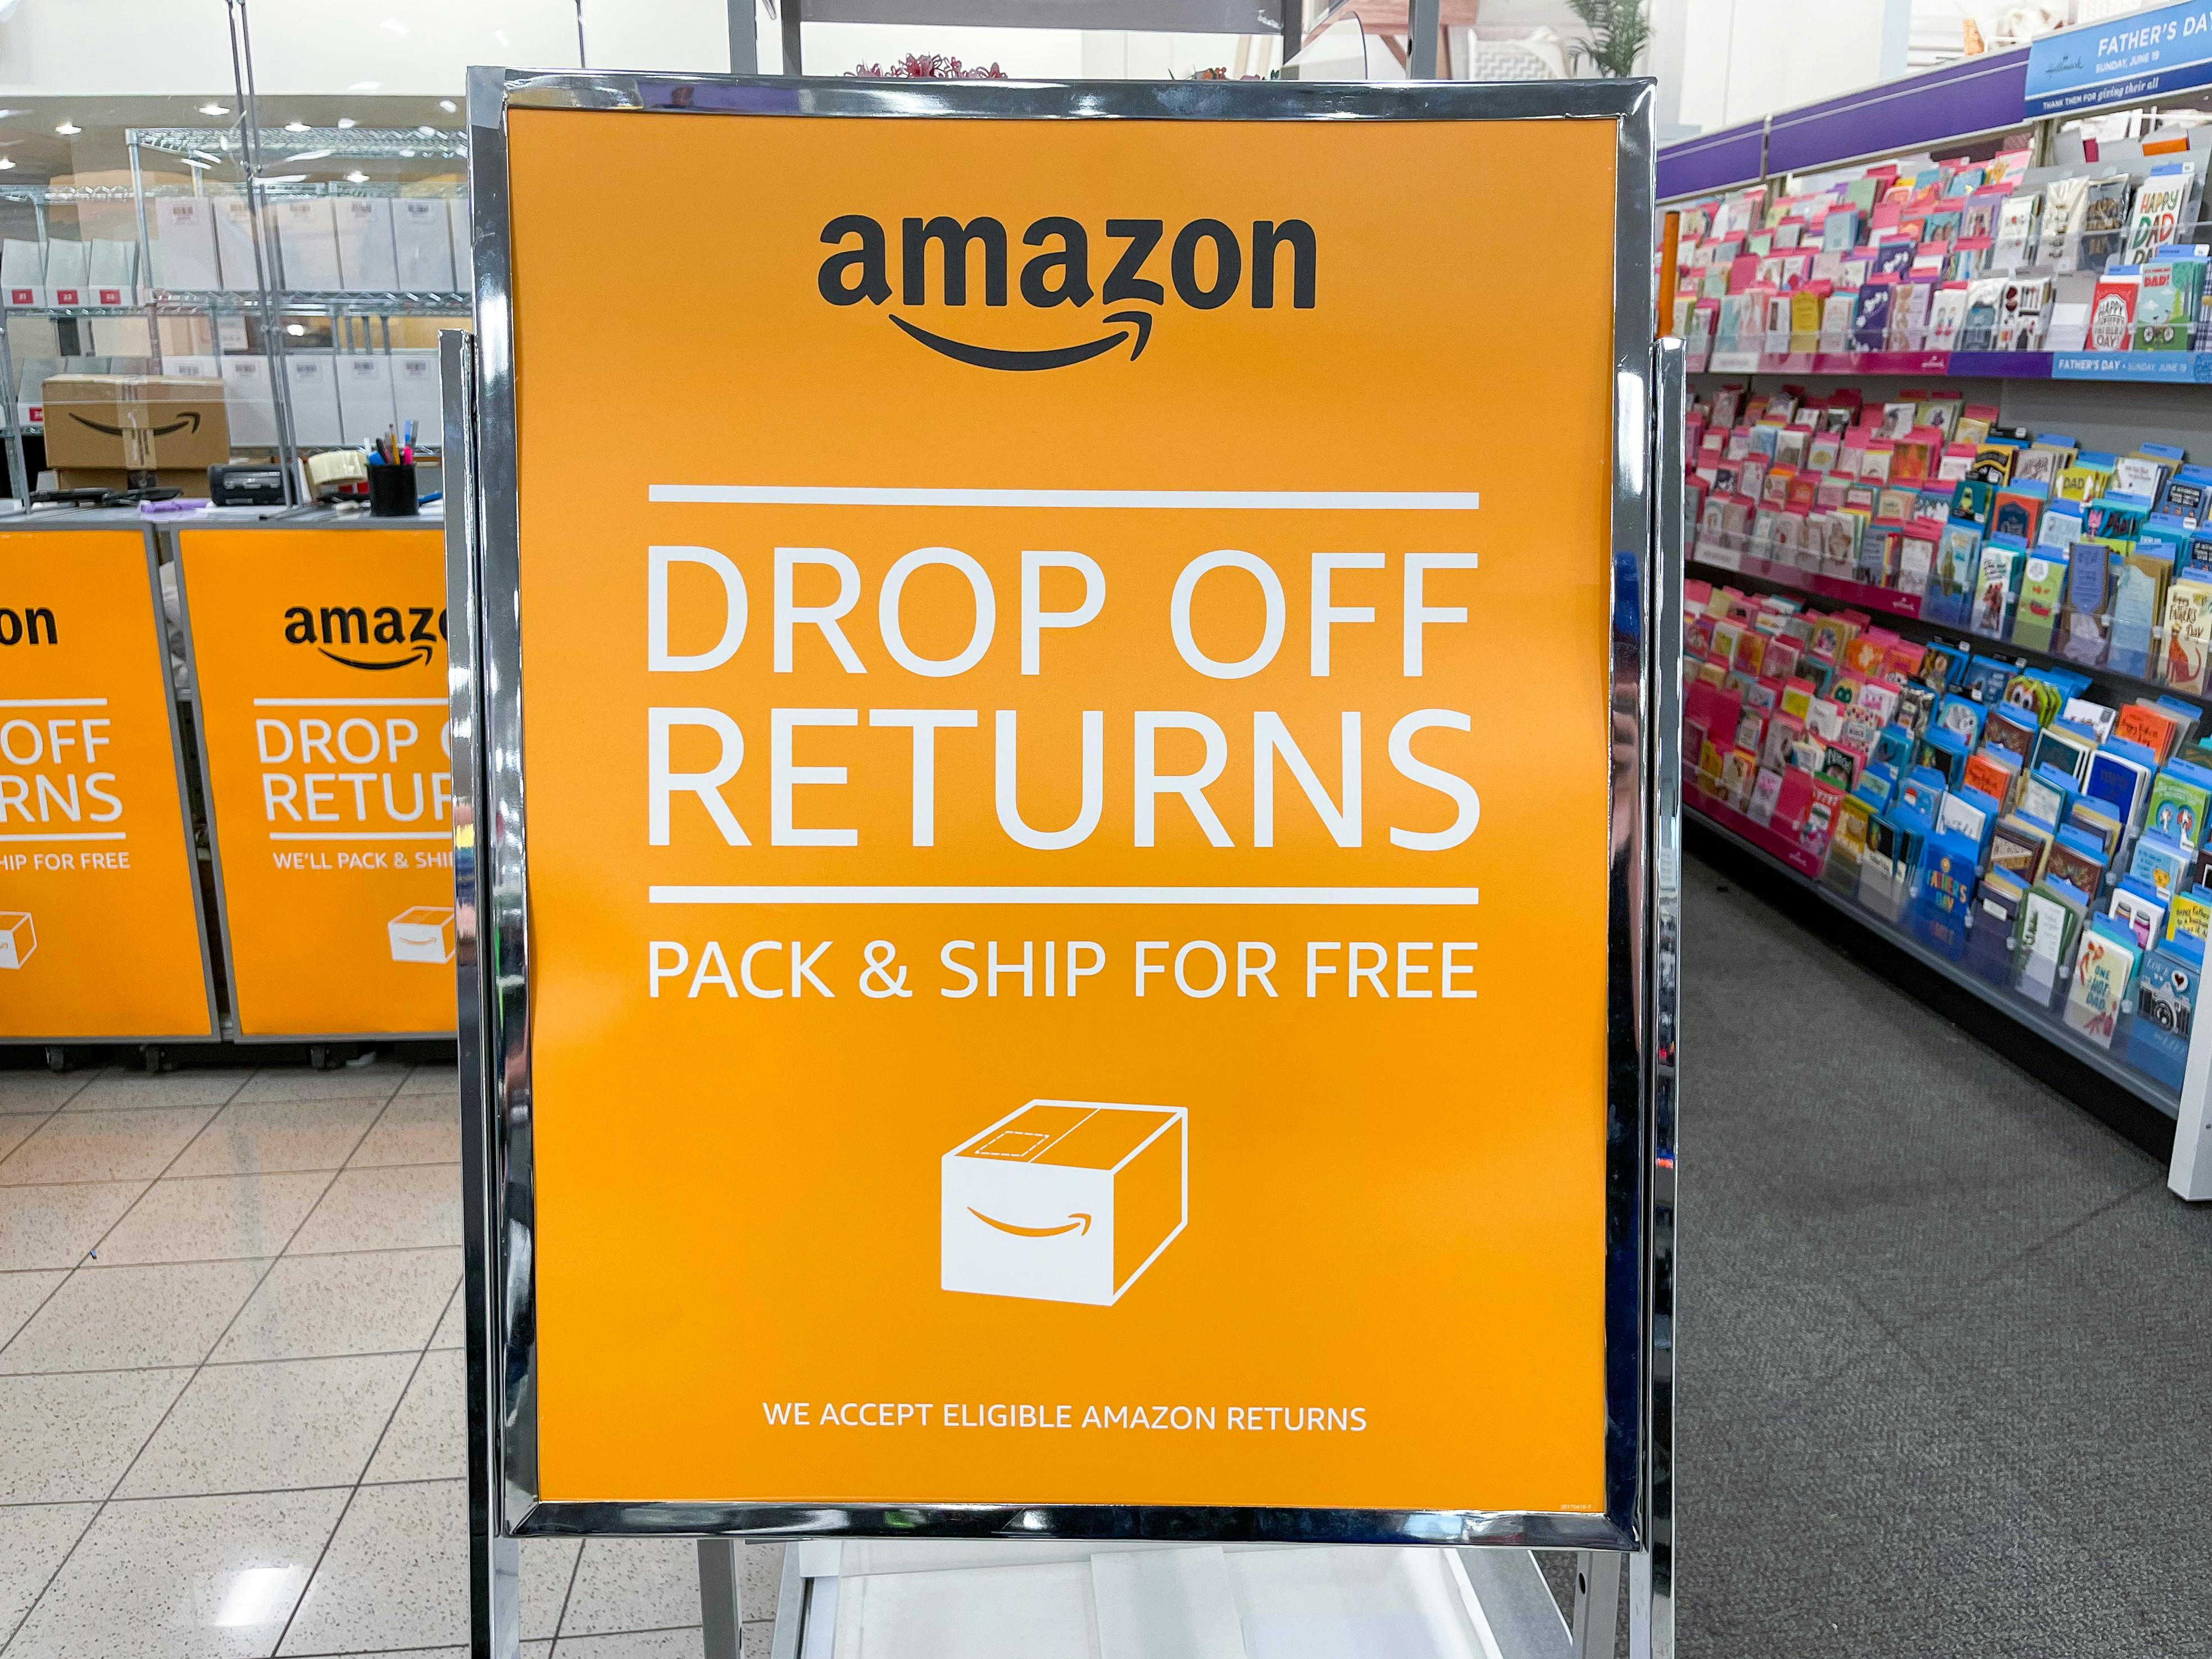 The Amazon drop off returns sign inside Kohl's.